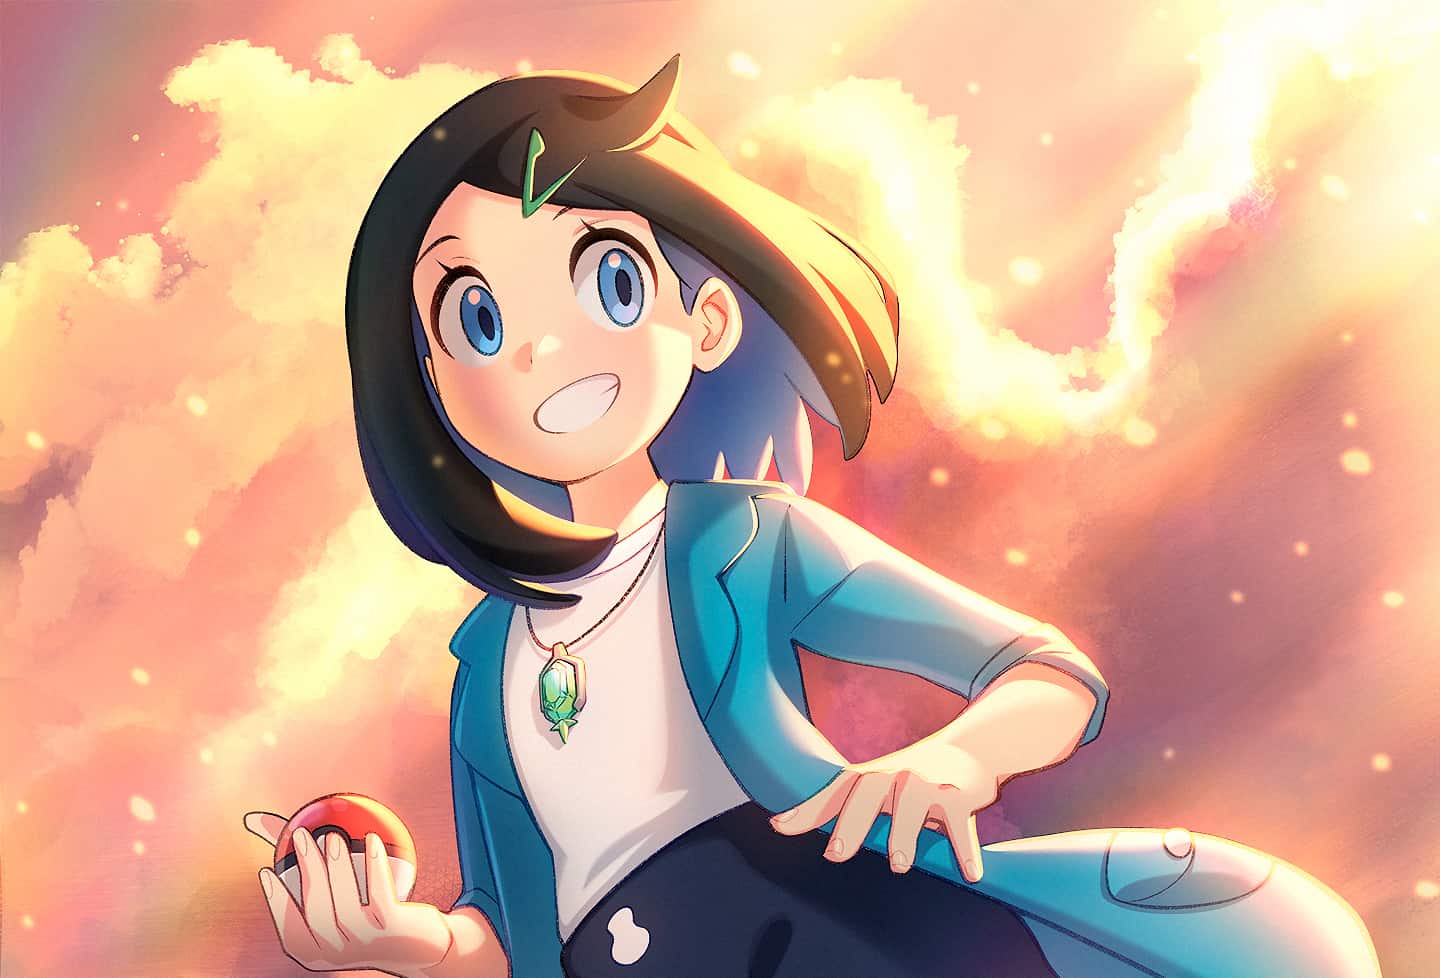 Pokemon: The Design Of Every Protagonist, Ranked